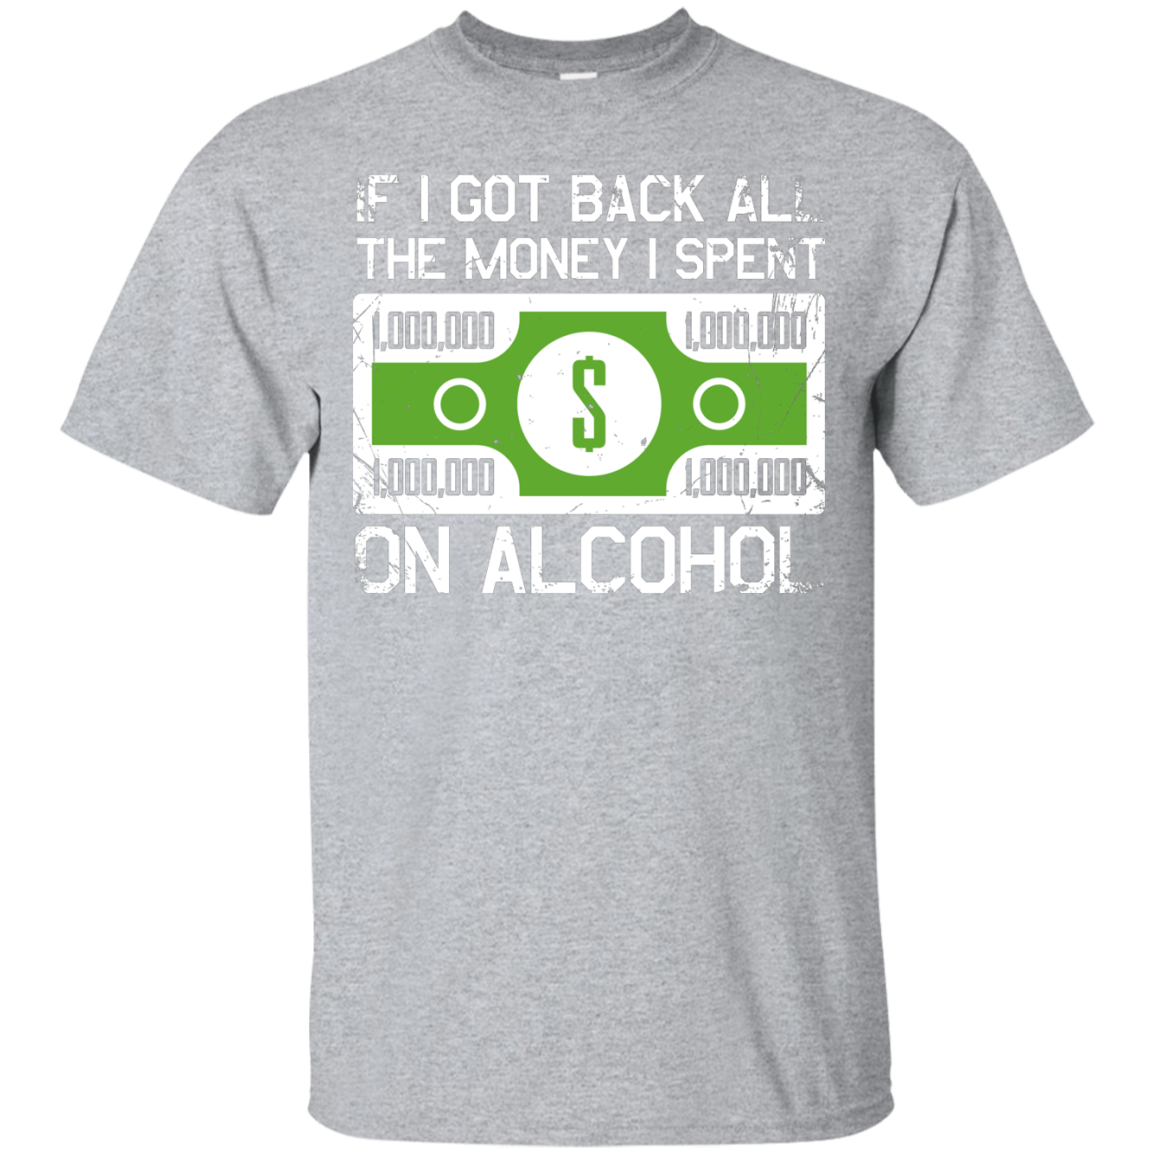 If I Got Back All The Money I Spent On Alcohol (Dollar Sign) T-Shirt Apparel - The Beer Lodge